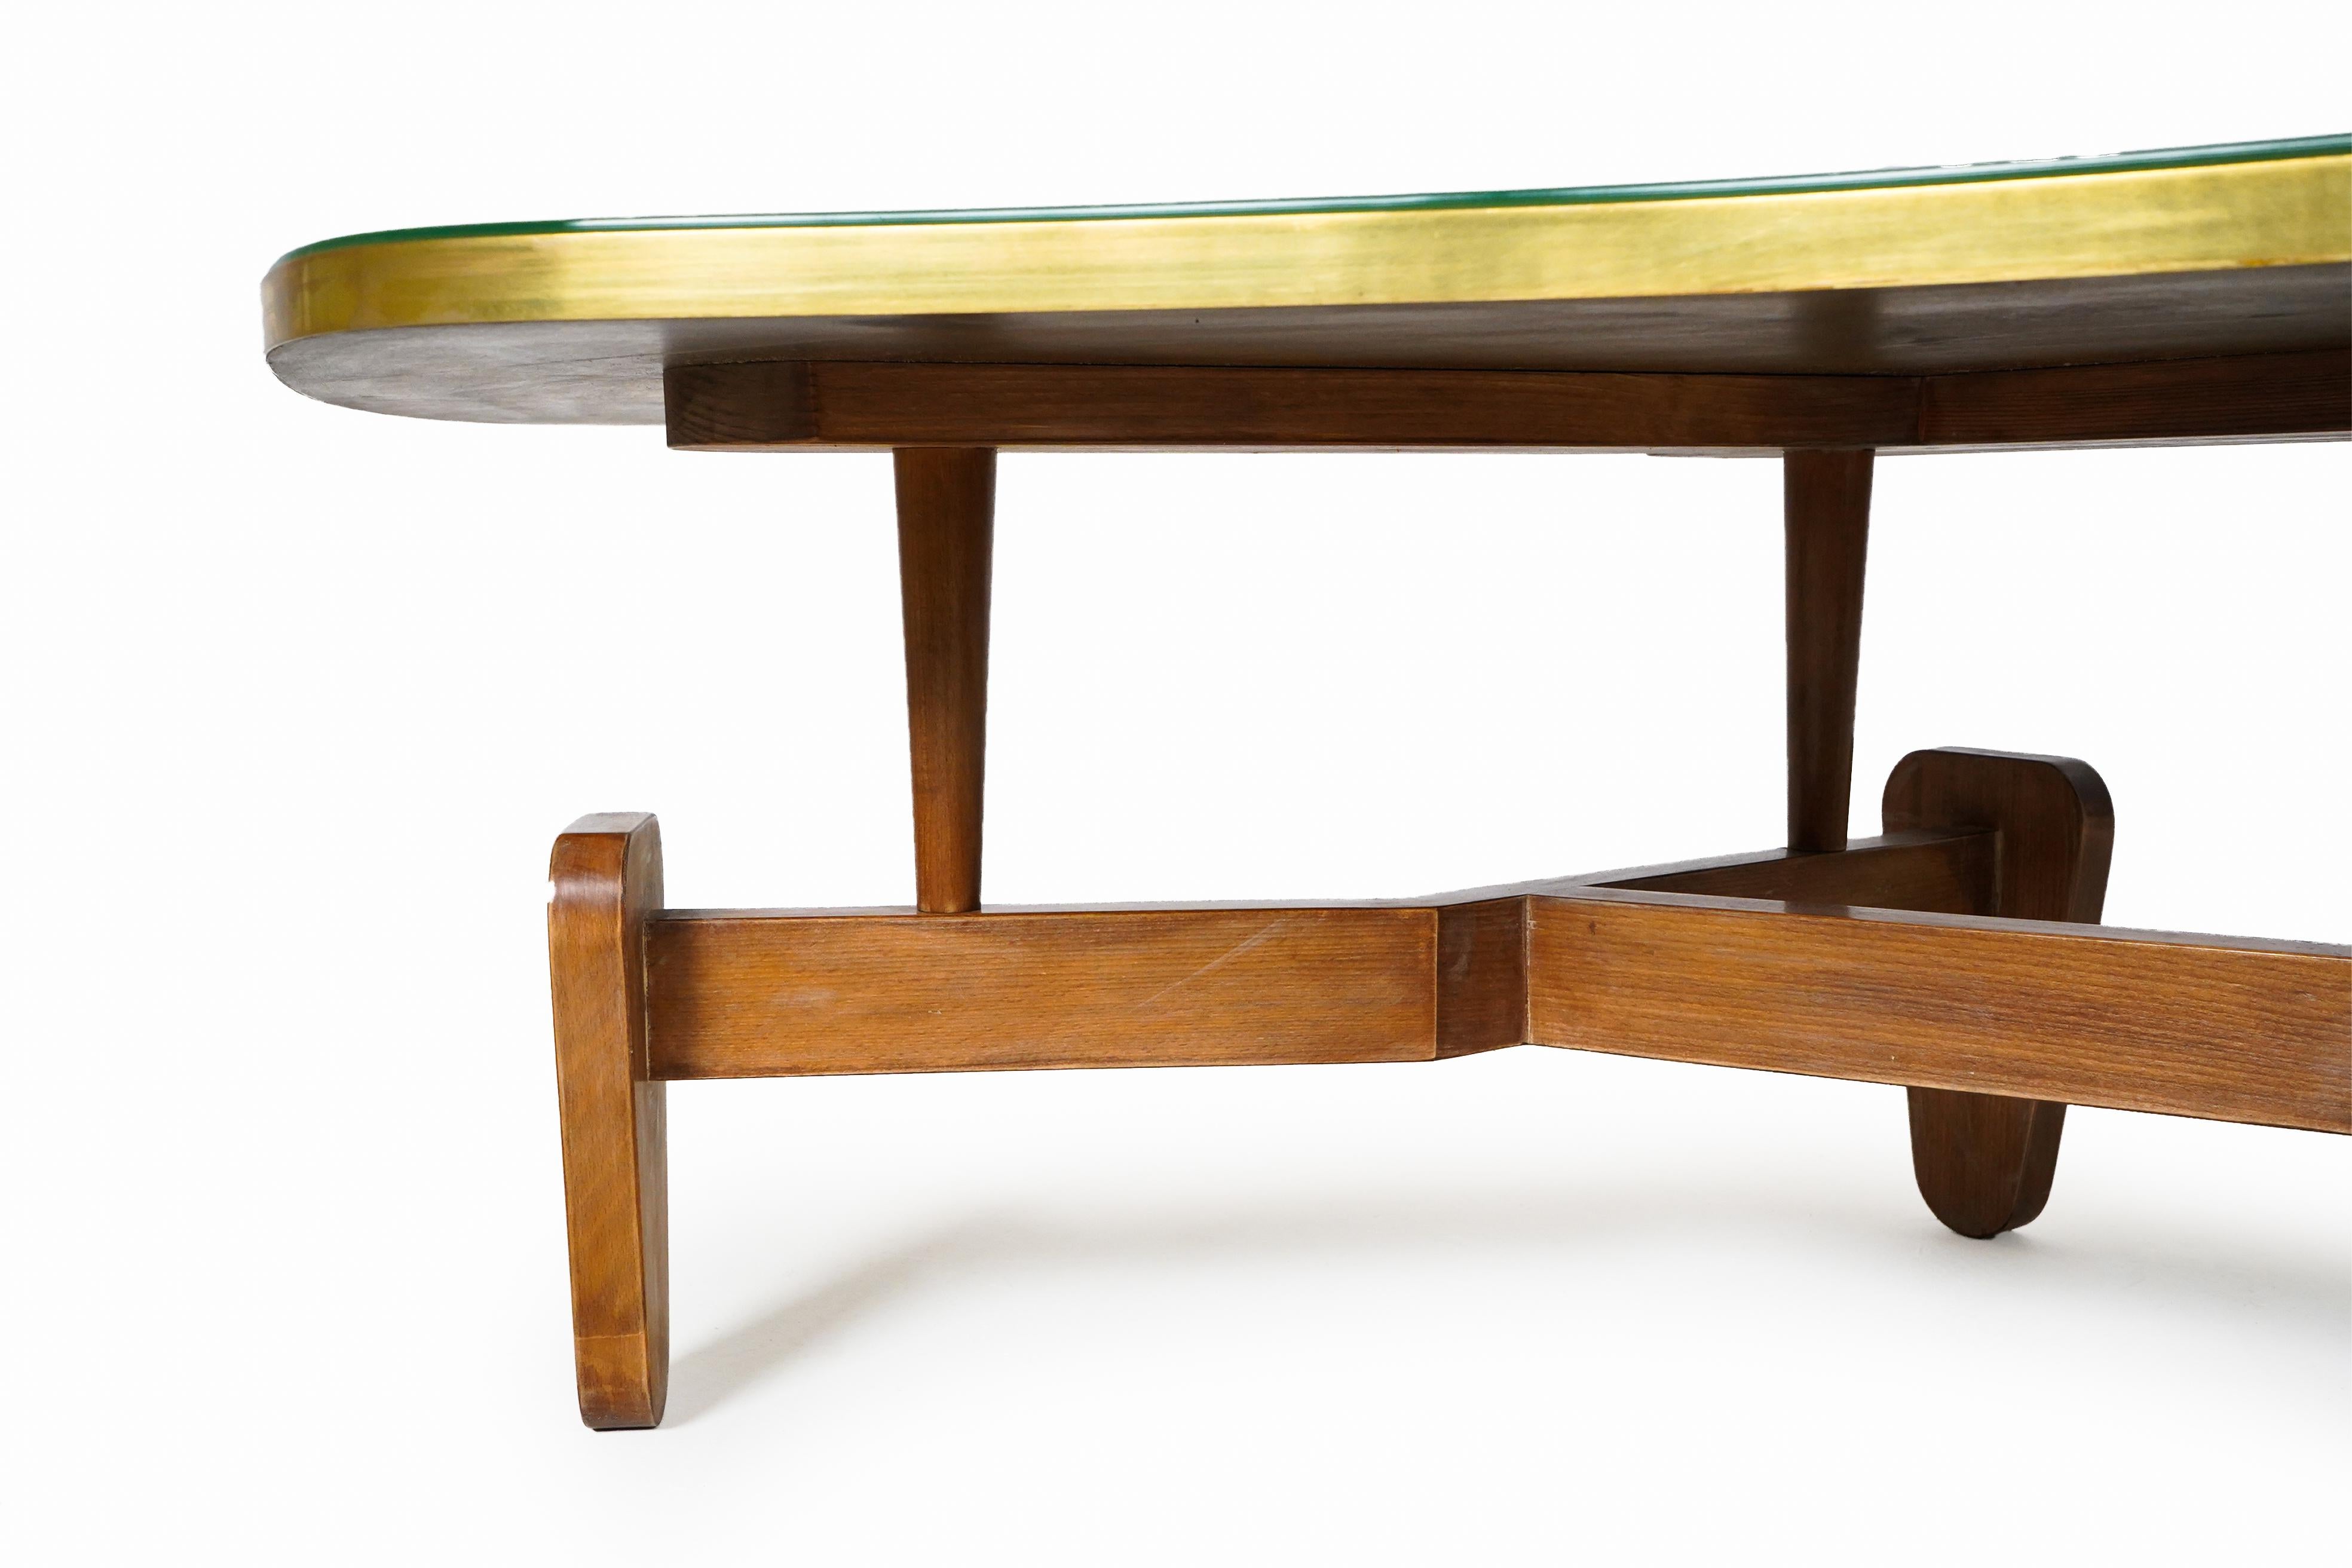 20th Century Boomerang Shape Coffee Table with Green Glass Top